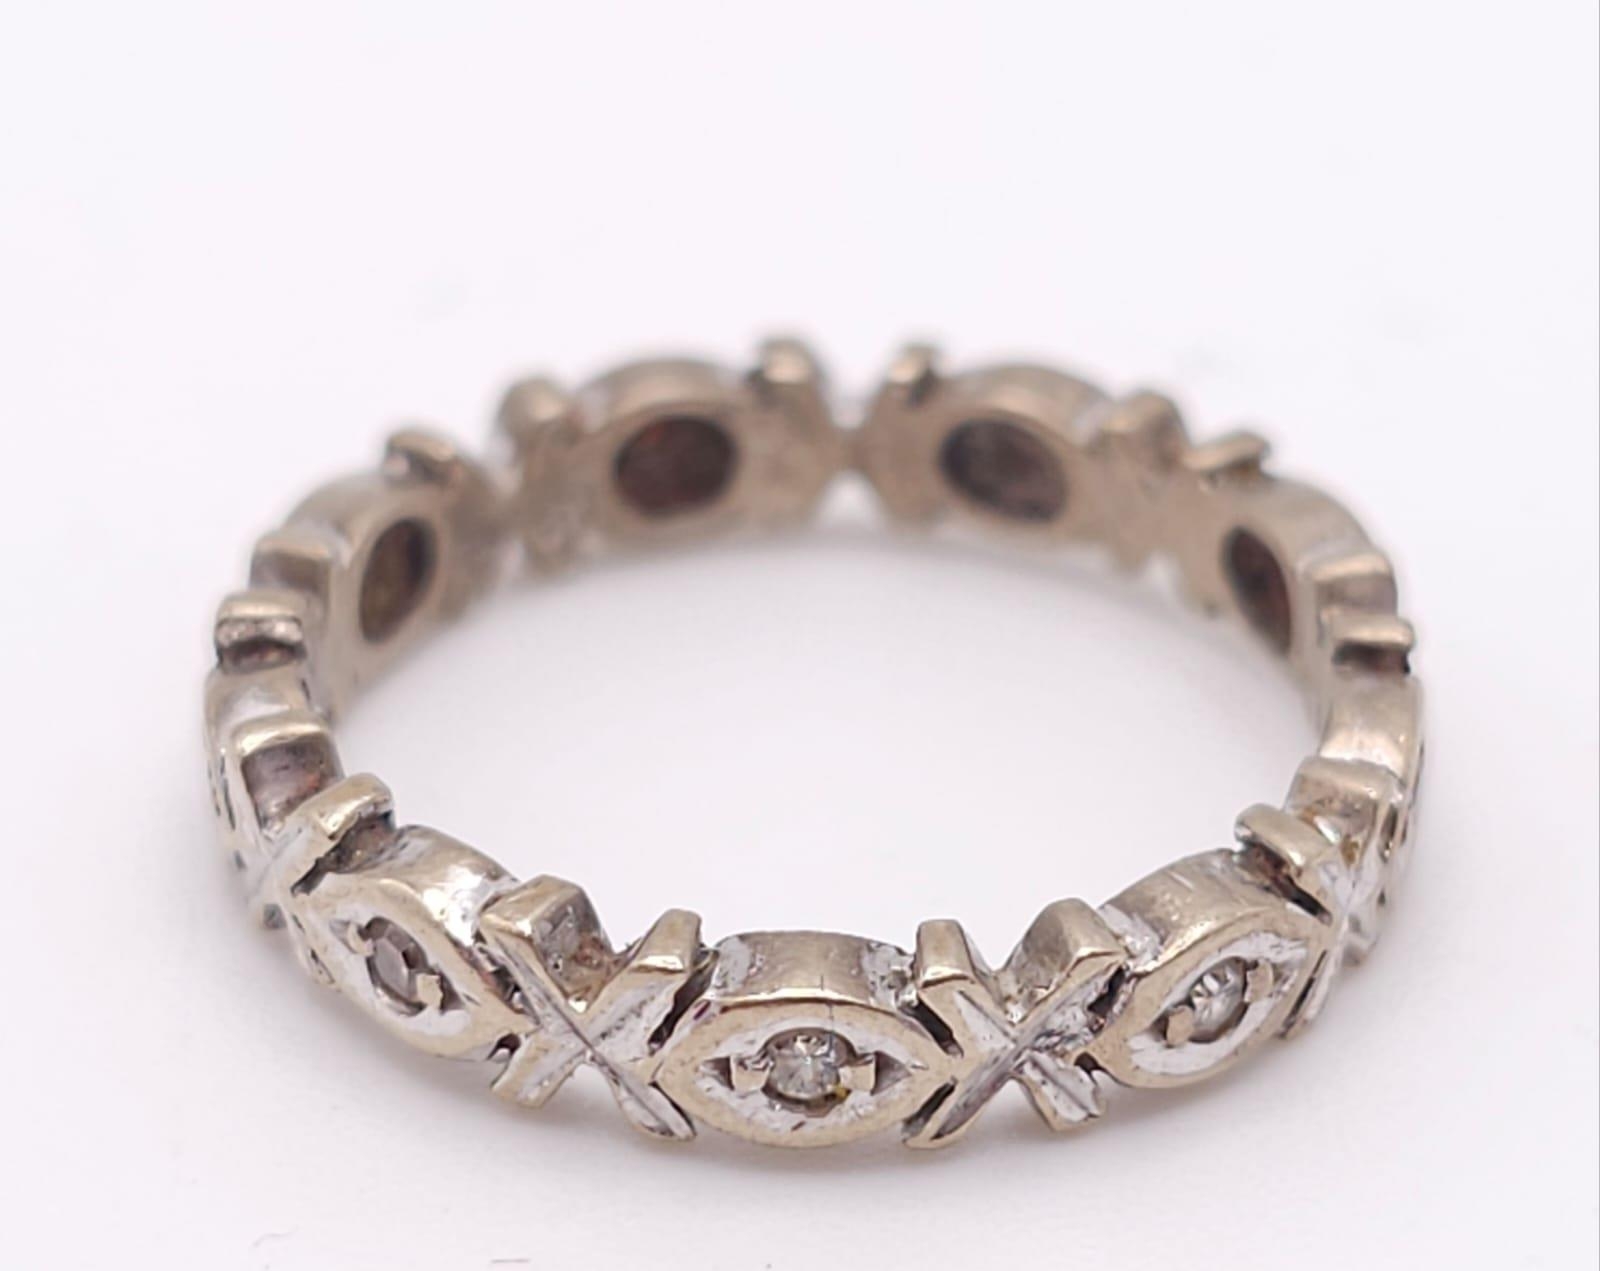 A Vintage 18K White Gold Diamond Eternity Ring. Size K. 3.08g total weight. Ref: 016302 - Image 3 of 5